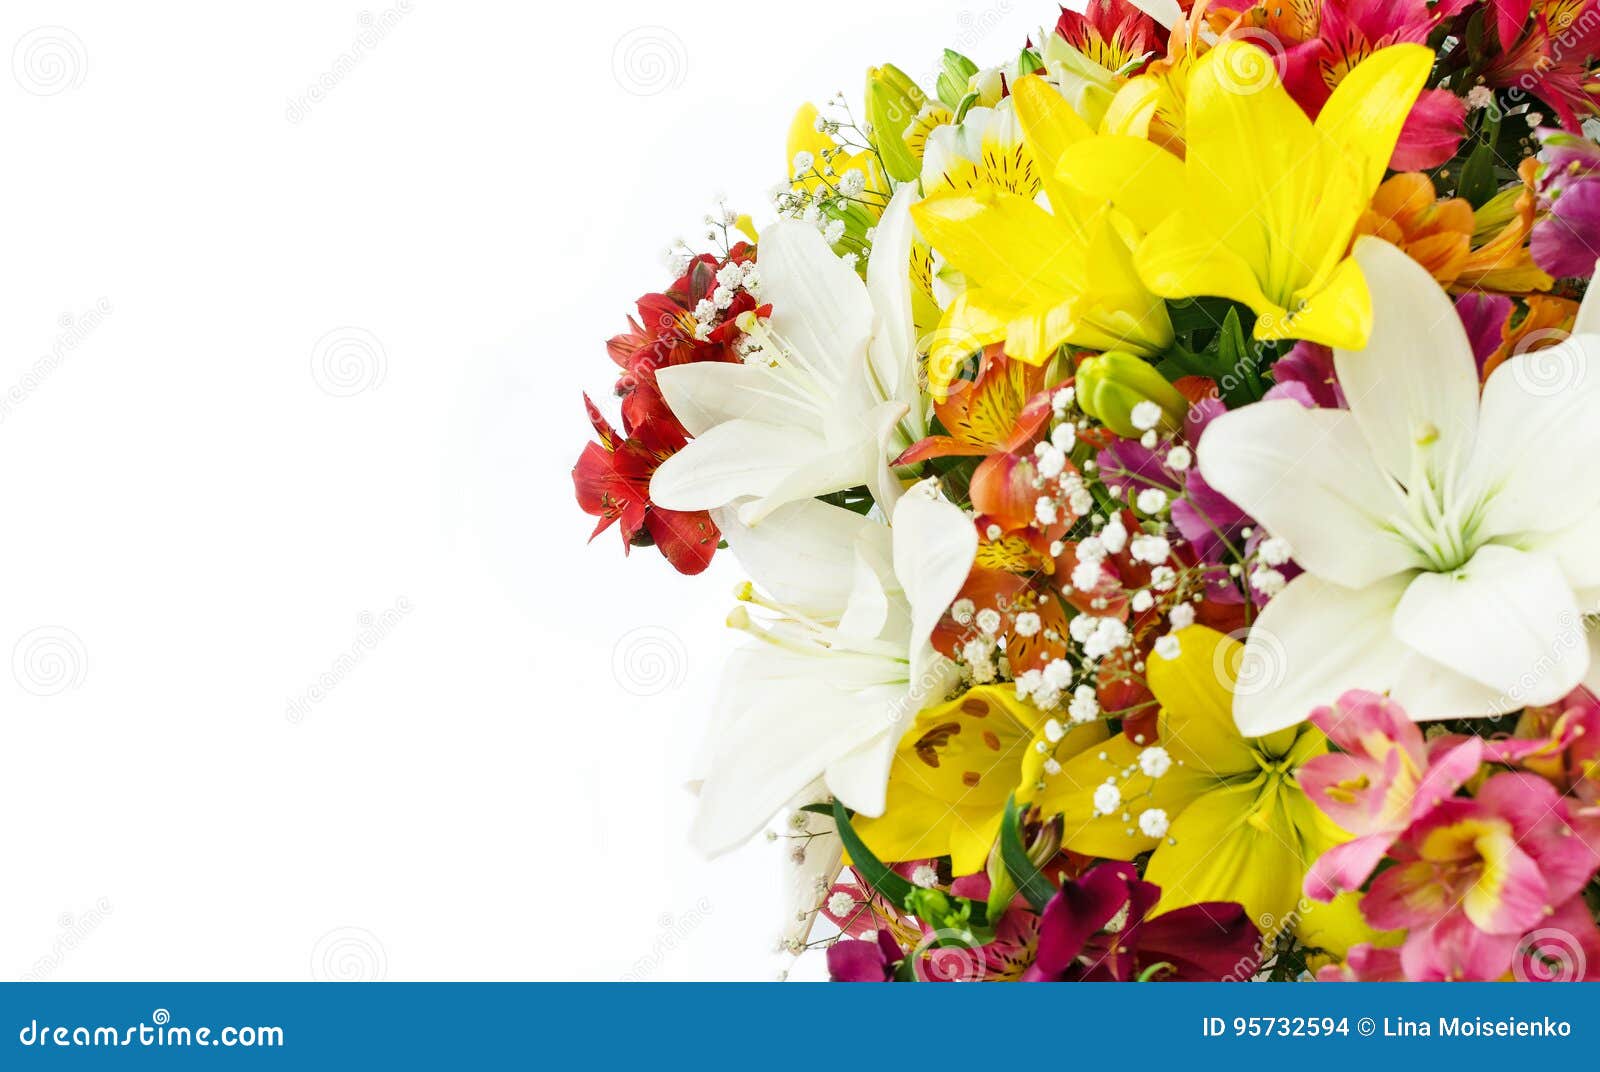 33,739 Congratulations Flowers Stock Photos - Free & Royalty-Free ...